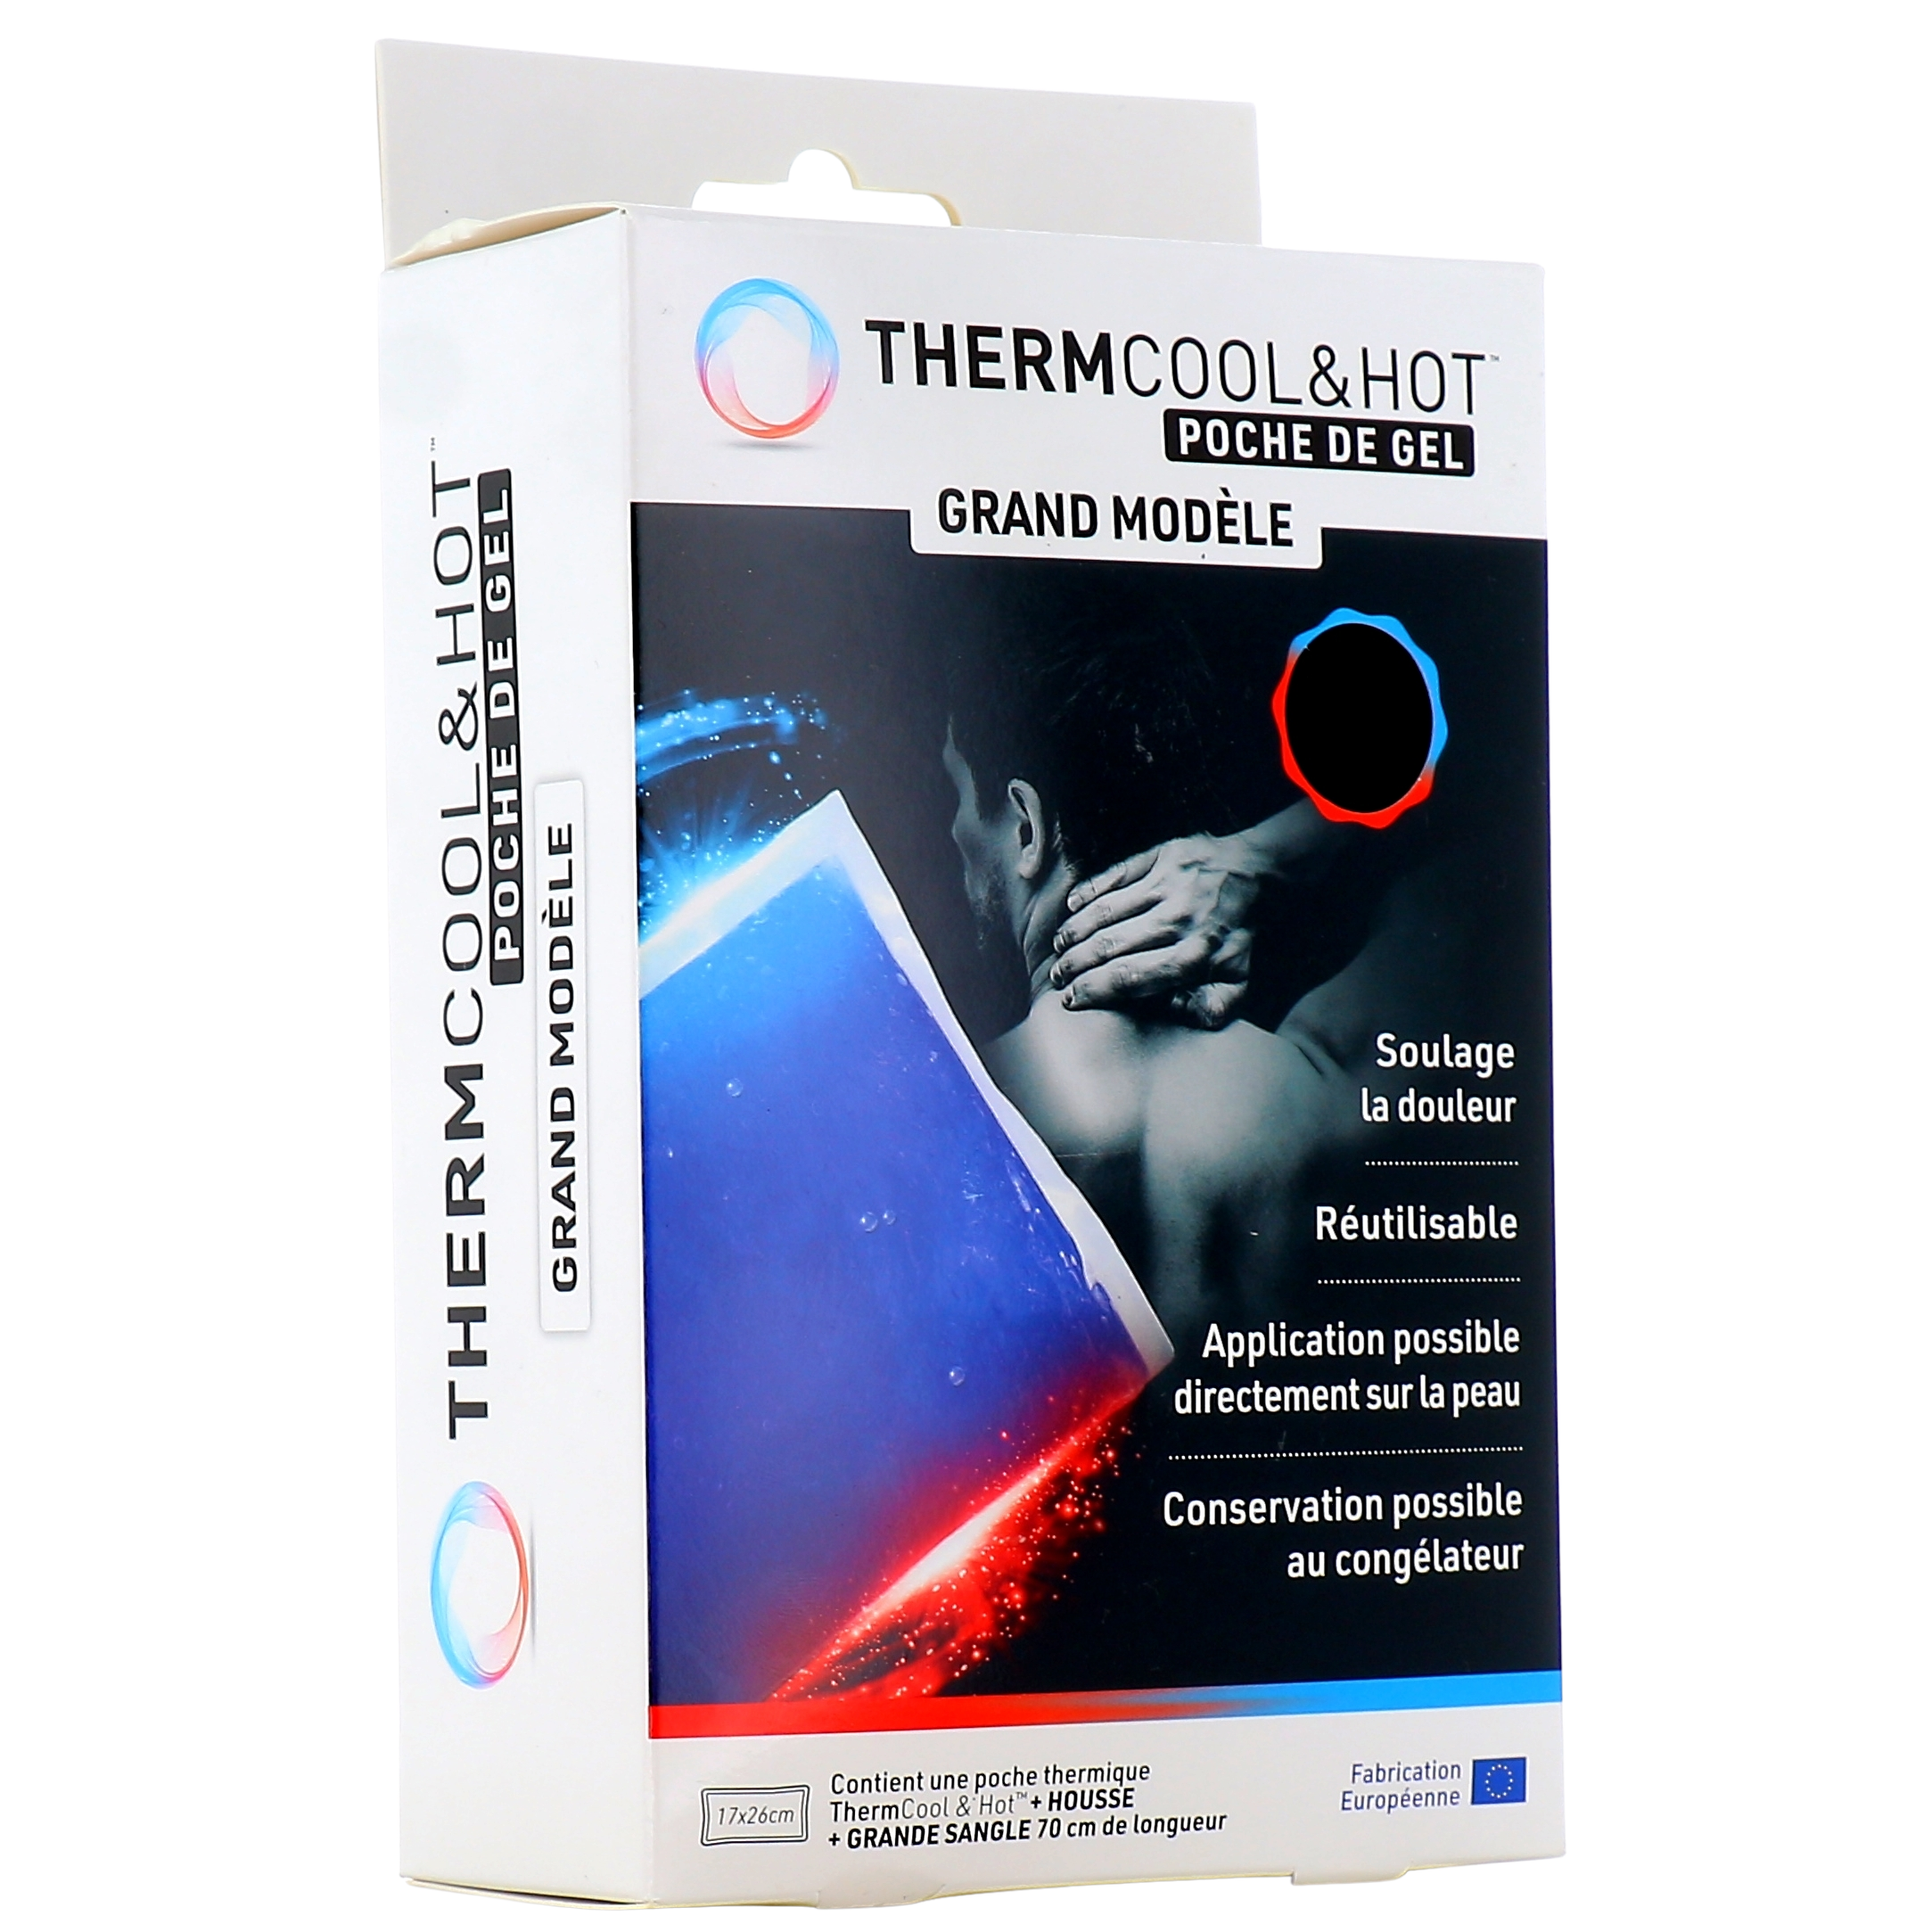 Thermcool & Hot poche chaud froid - Coussin thermique anti douleur